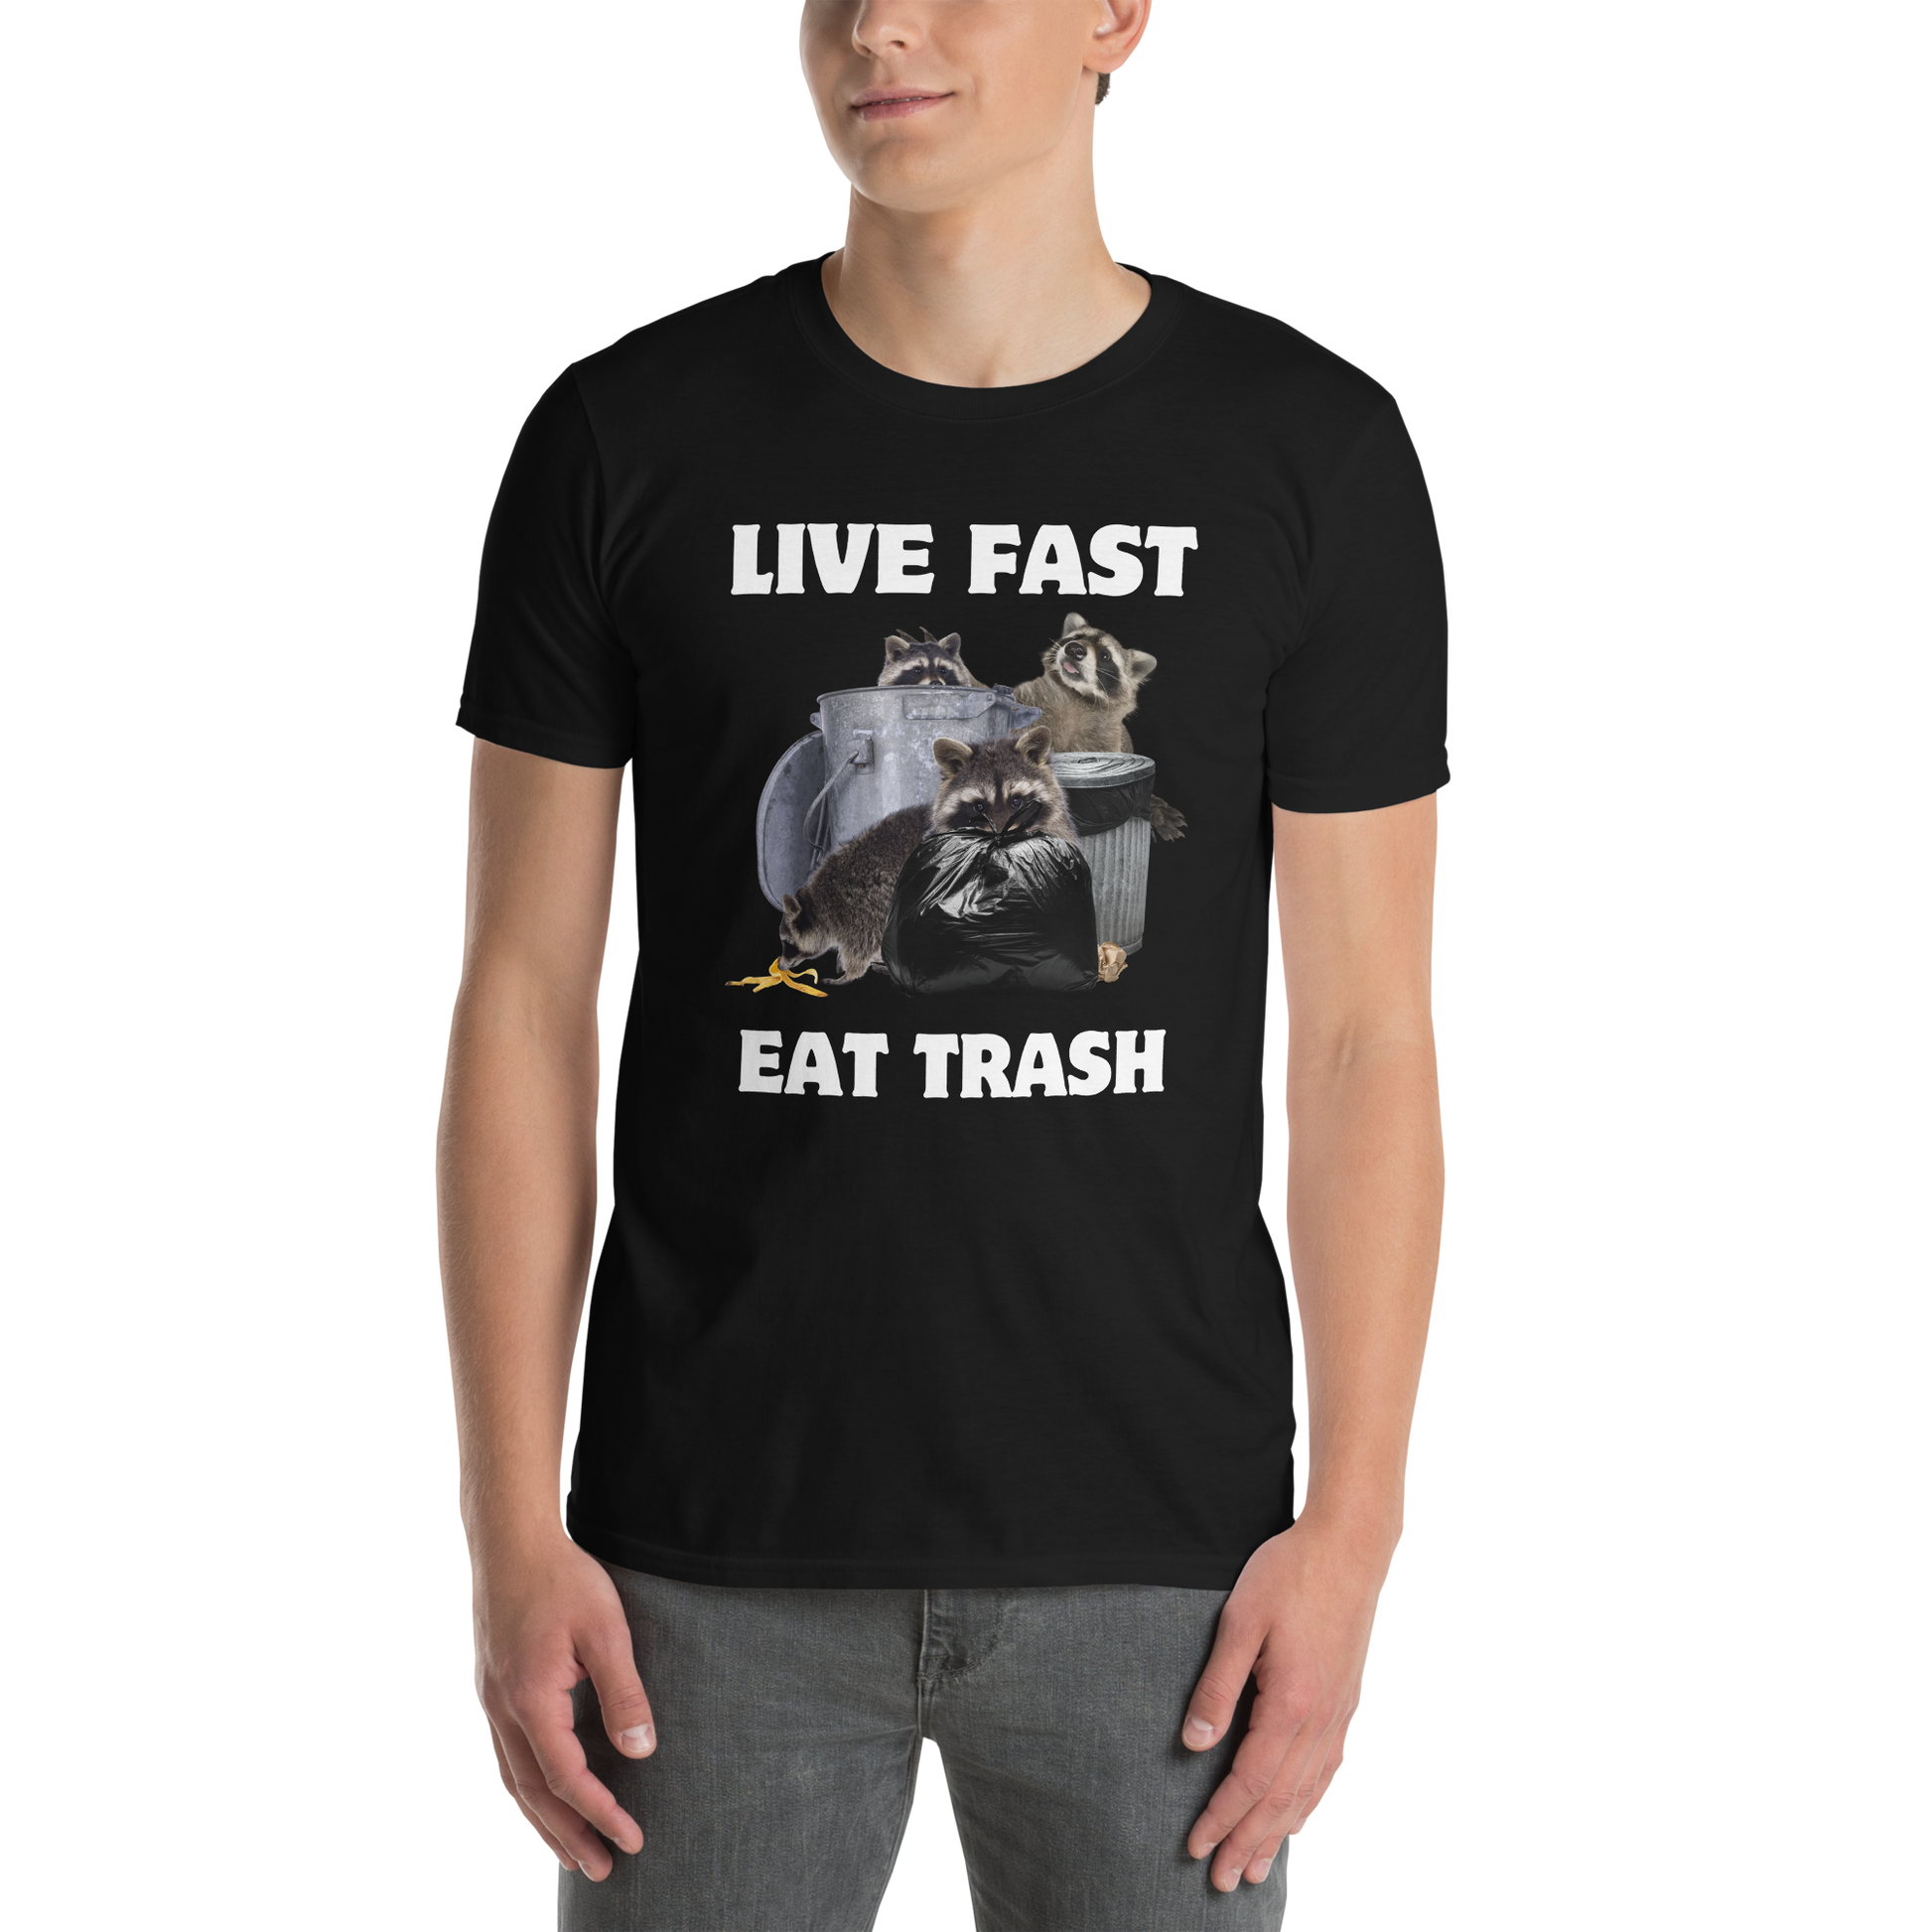 Man wearing a Black Raccoon T-Shirt featuring a hilarious Live Fast Eat Trash graphic on the chest - Funny Graphic Raccoon T-shirts - Boozy Fox